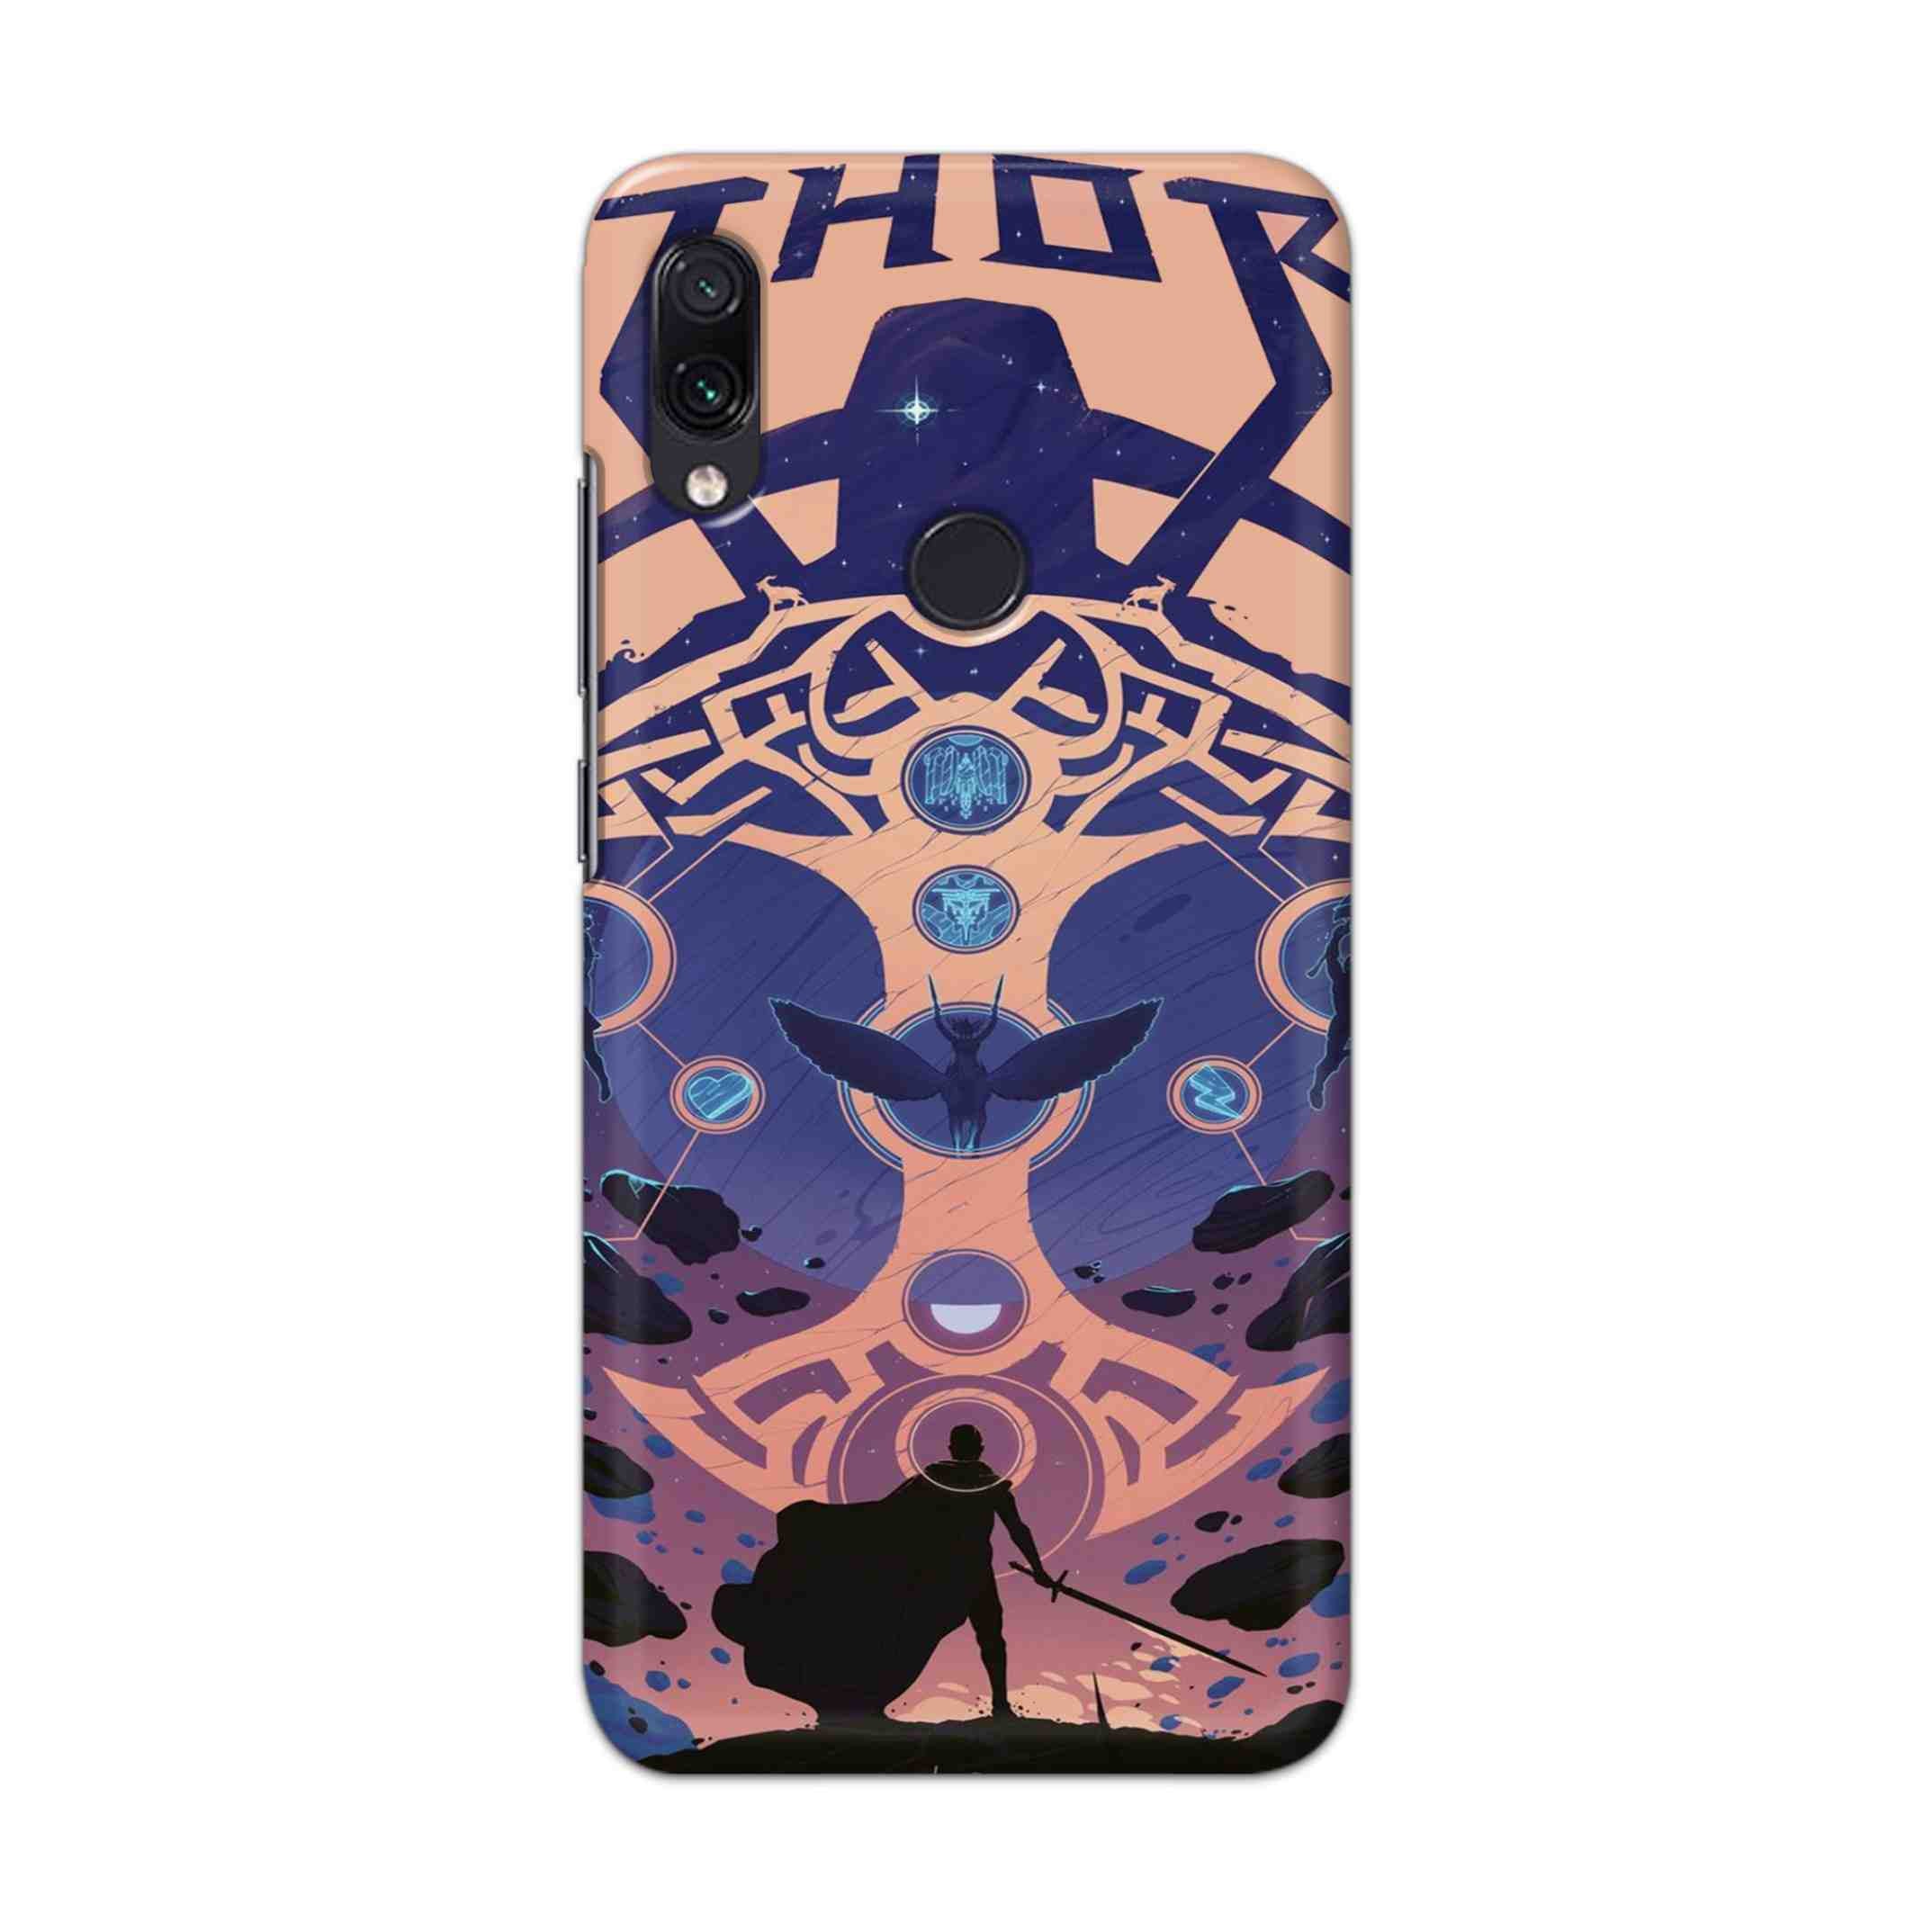 Buy Thor Hard Back Mobile Phone Case Cover For Redmi Note 7 / Note 7 Pro Online